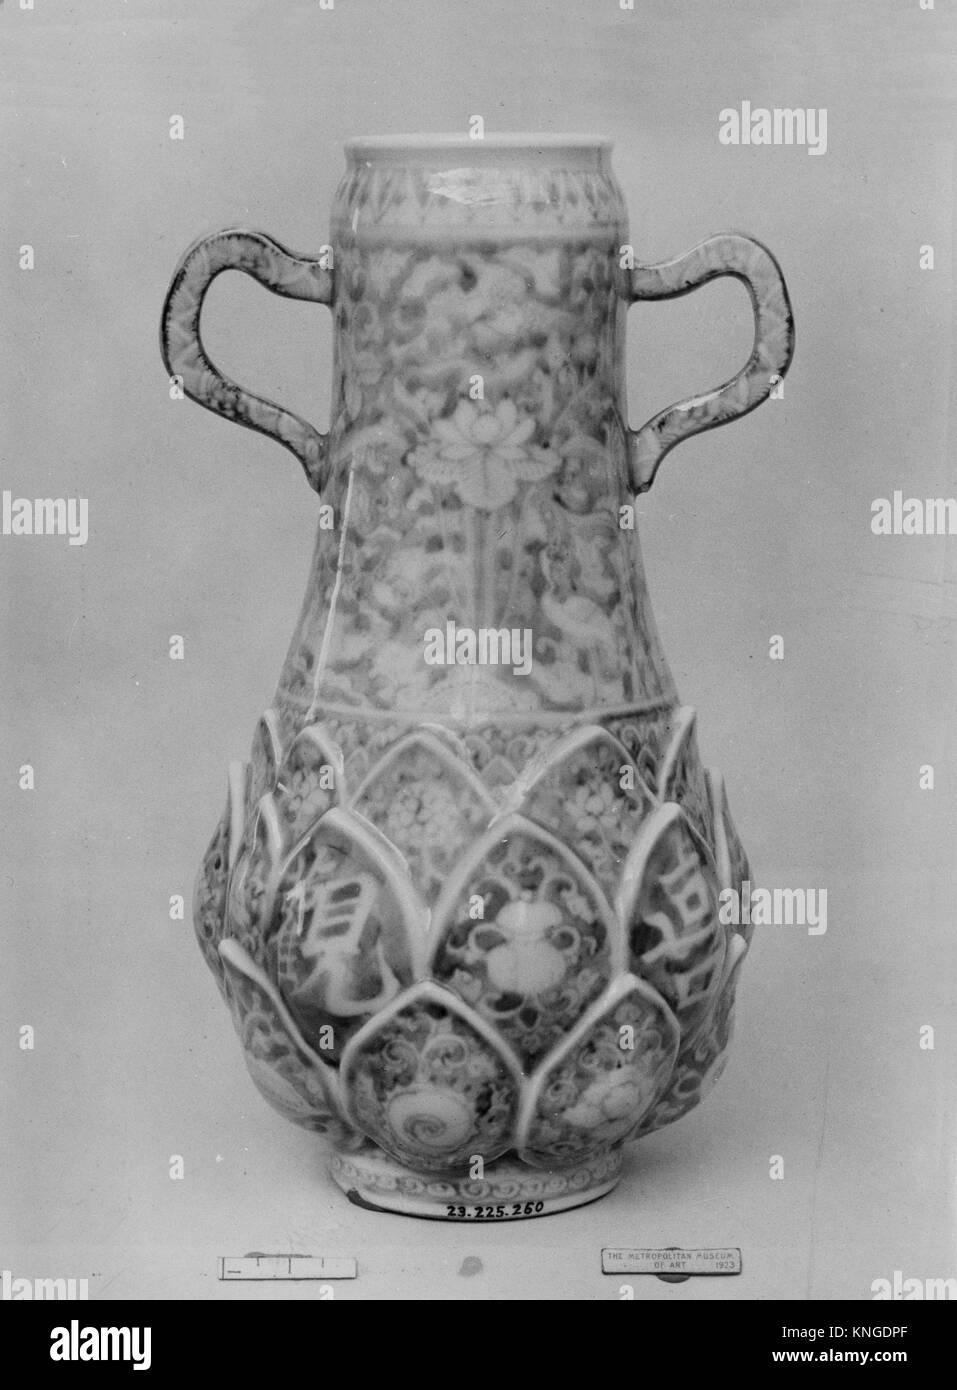 Vase. Period: Edo period (1615-1868); Date: 1800; Culture: Japan; Medium: White porcelain decorated with blue, the lower part modeled in high relief Stock Photo